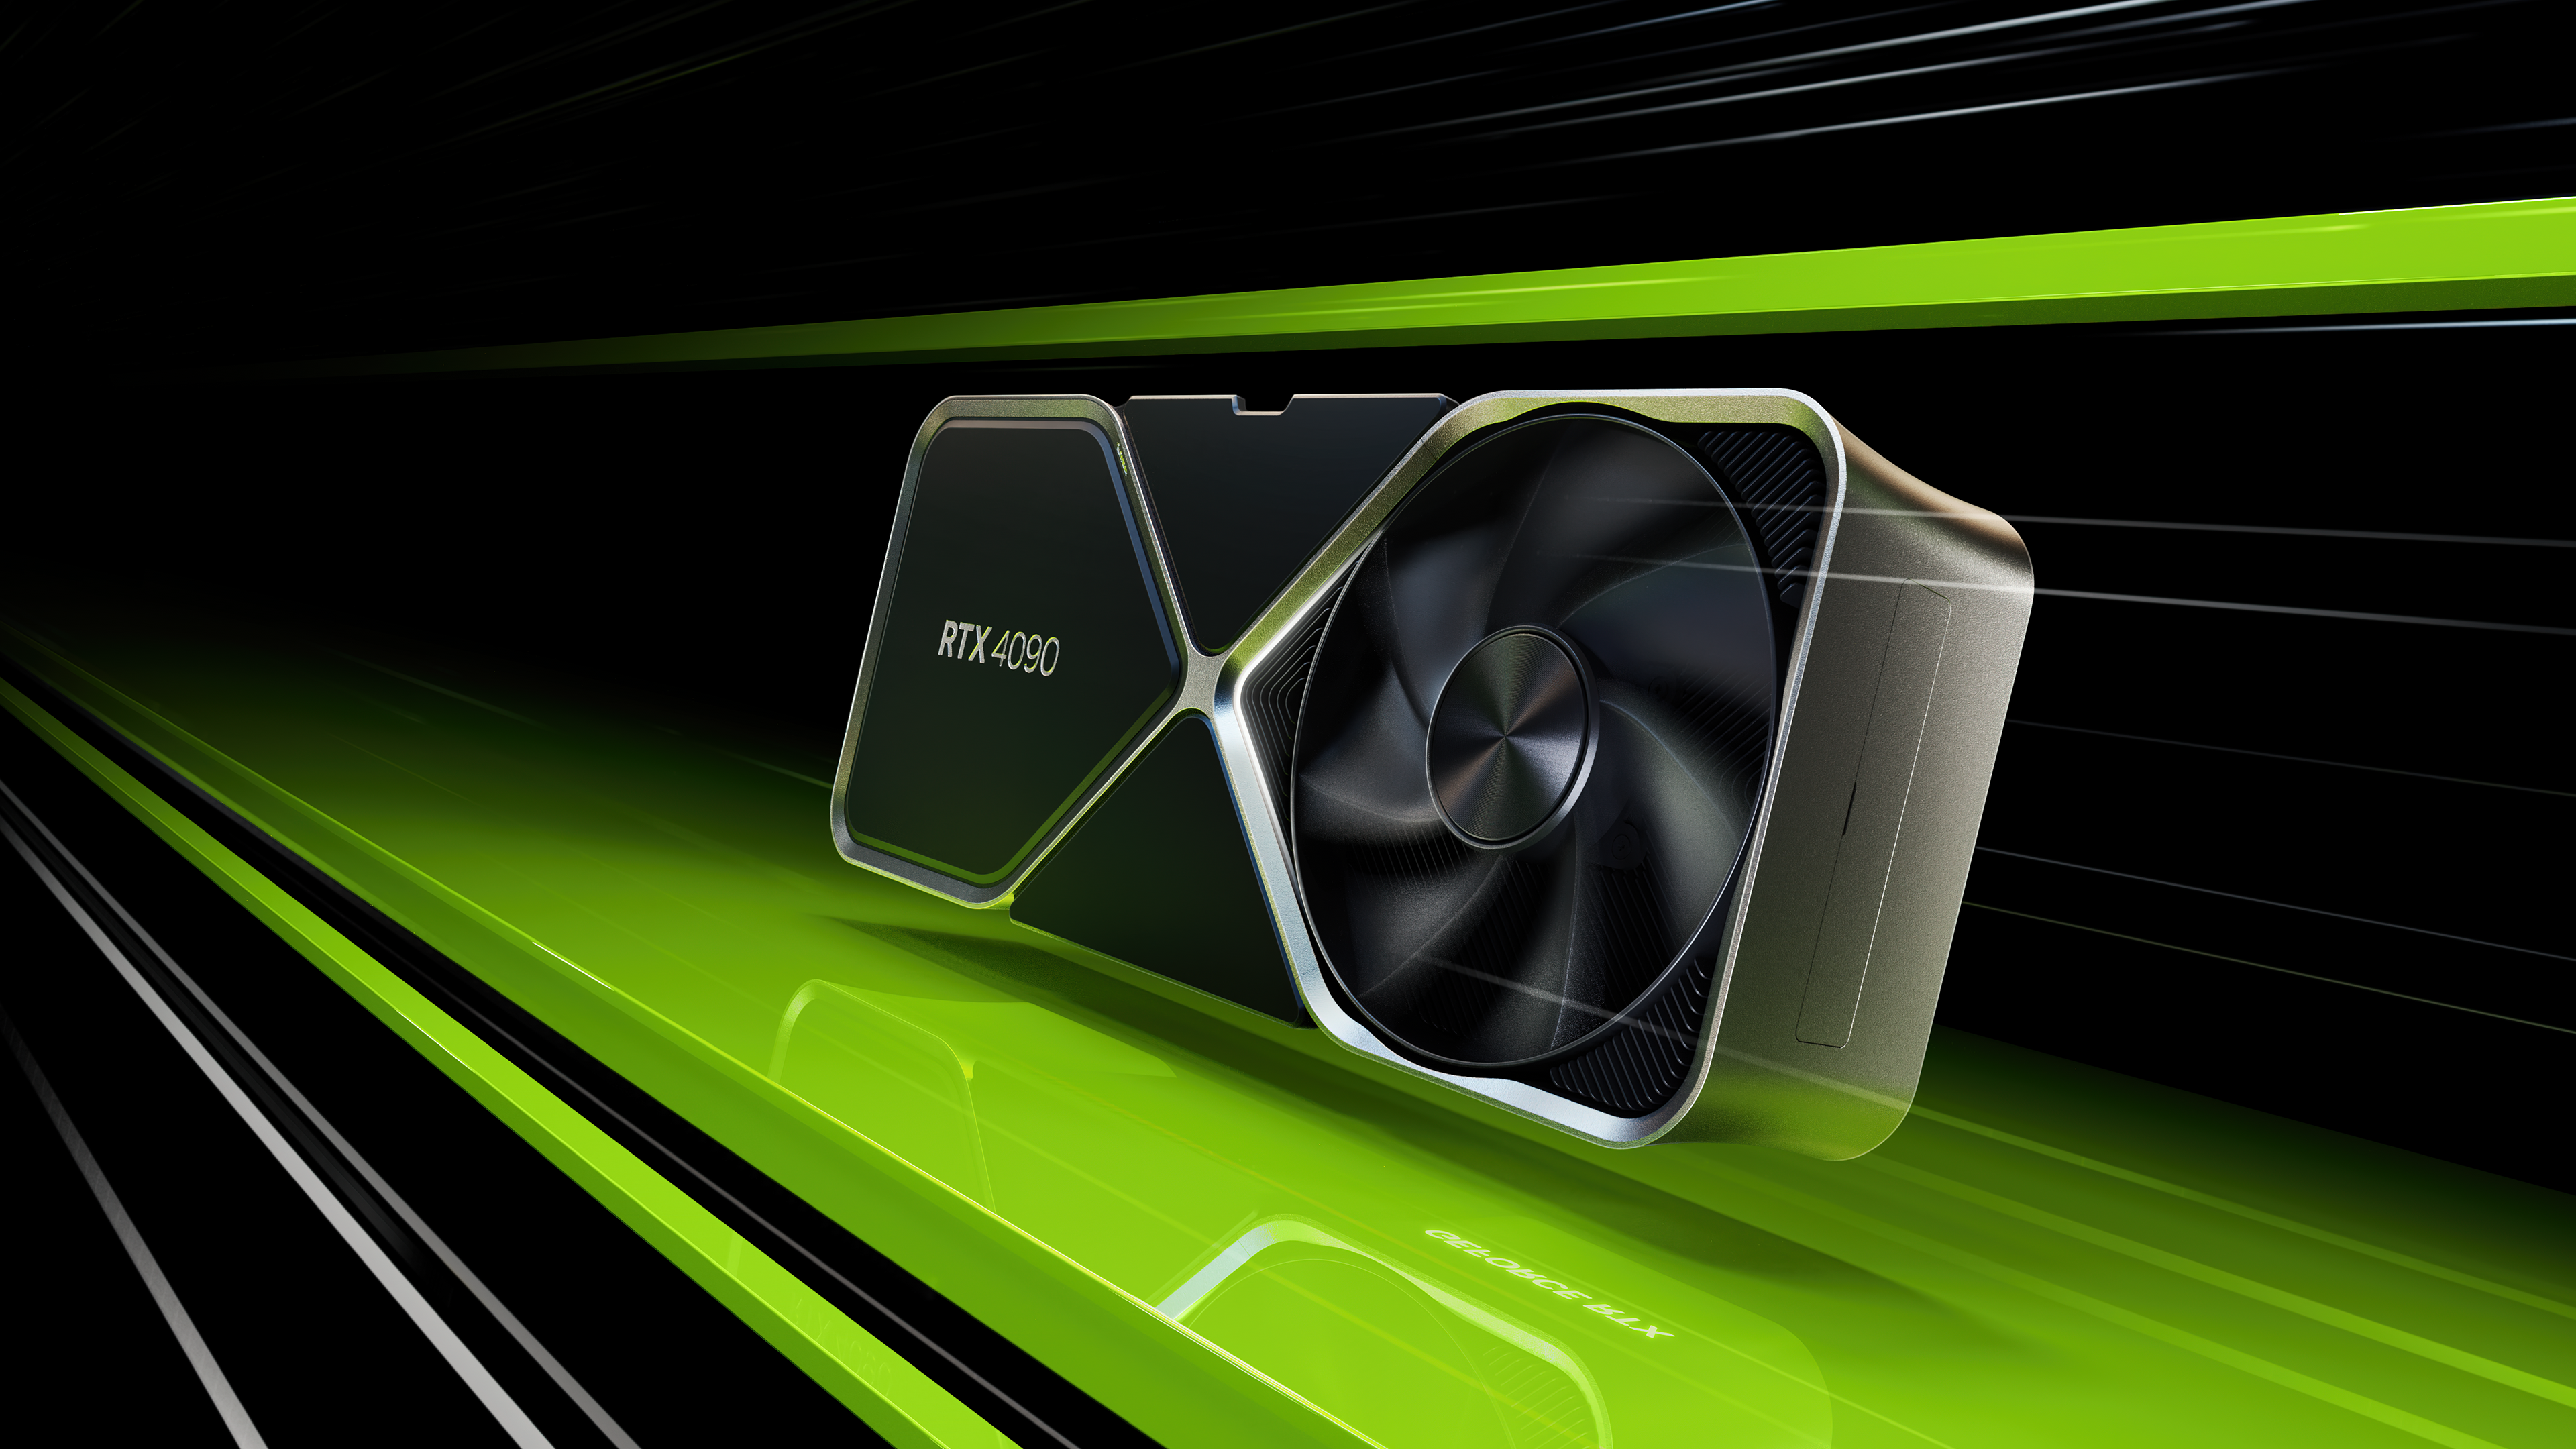 Image for Nvidia RTX 4090 review: a hair-raising new bar for PC graphics performance – with hefty costs attached